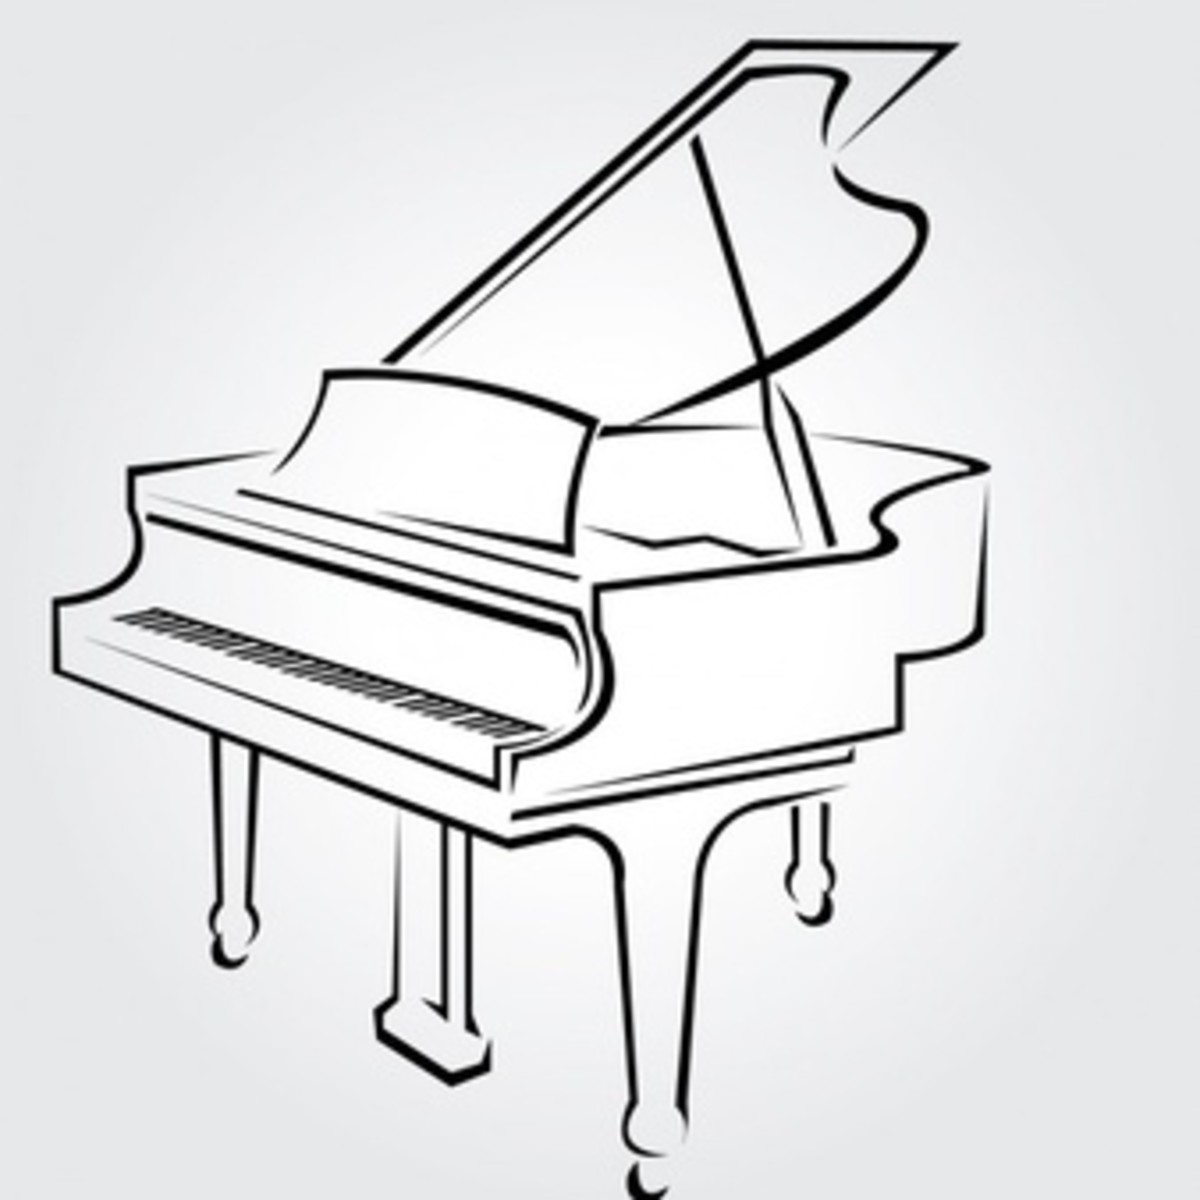 Keyboard Line Drawing | Free download on ClipArtMag